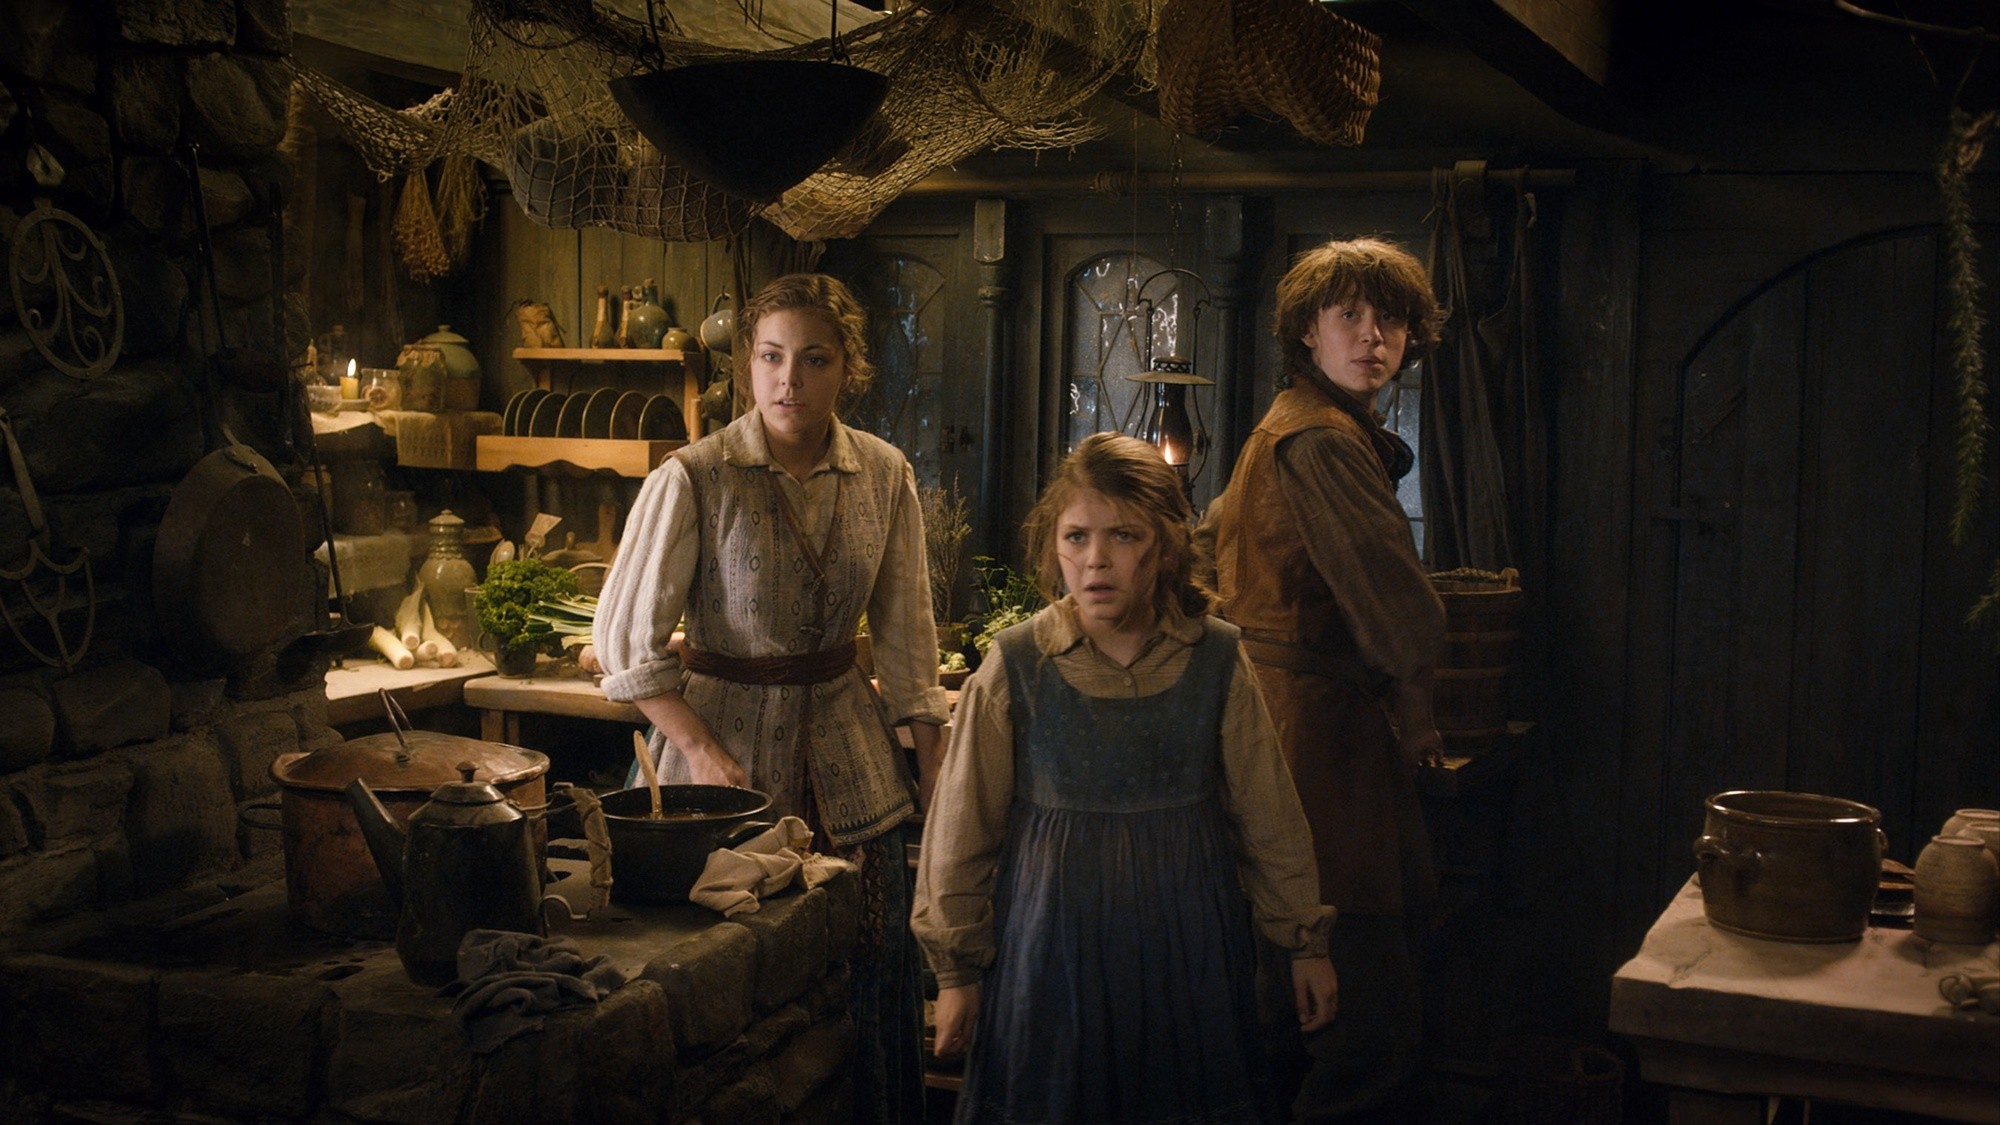 John Bell stars as Bain in Warner Bros. Pictures' The Hobbit: The Desolation of Smaug (2013)